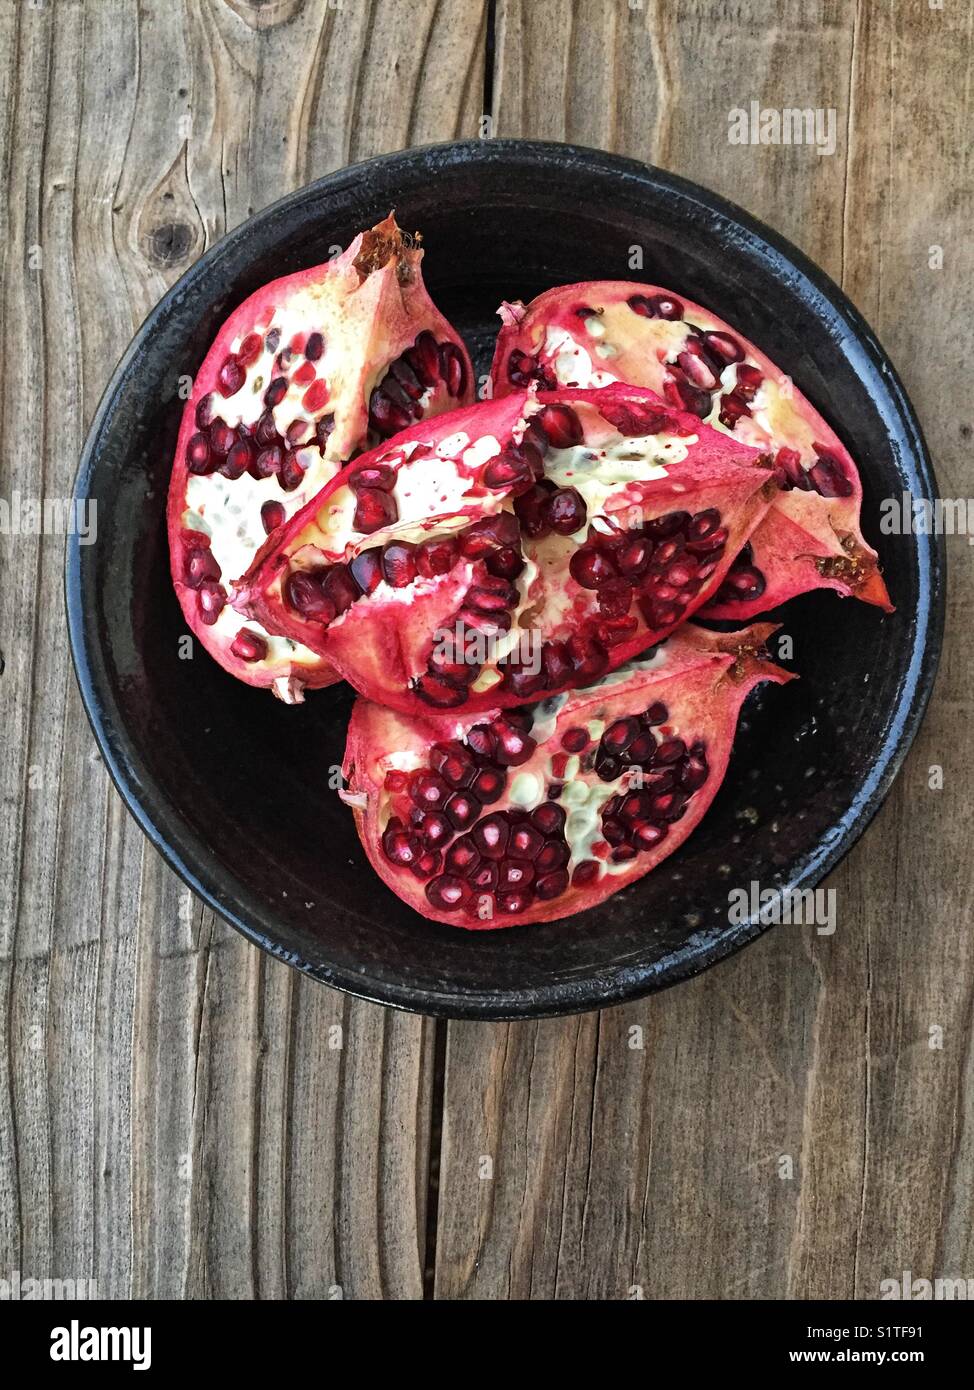 Pomegranate slices in a bowl Stock Photo